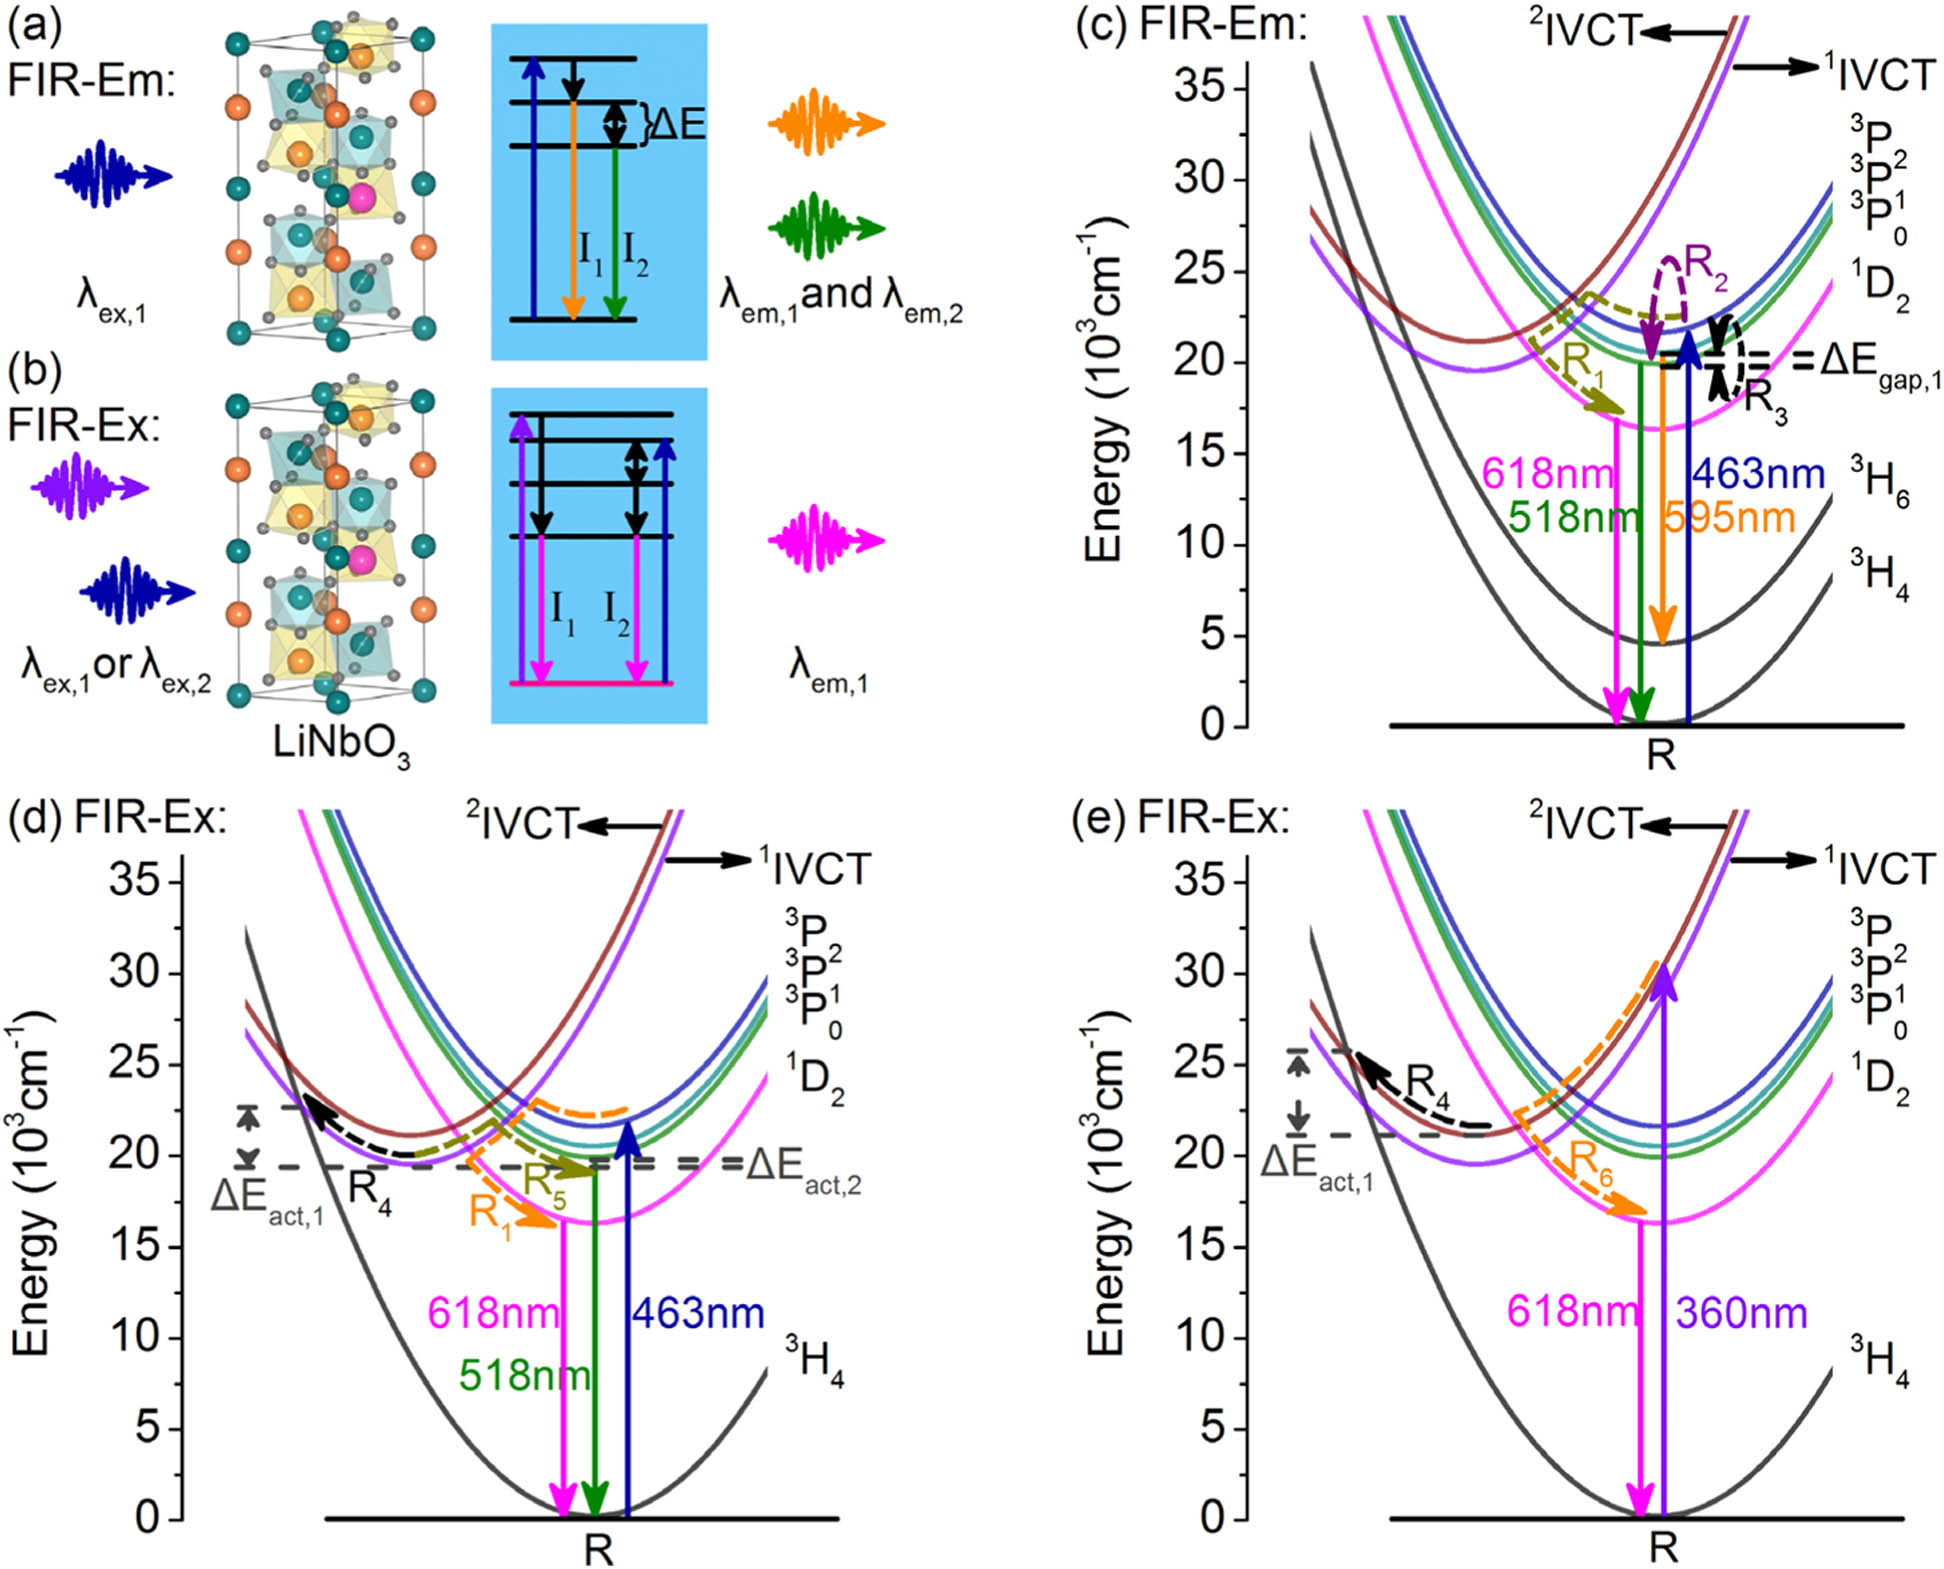 Comparison between FIR-Em and FIR-Ex thermometry strategies. Schematic diagrams for (a) FIR-Em and (b) FIR-Ex strategies applied to doped LN materials (doped LN structure: gray-O2−, cyan-Nb5+, orange-Li+, magenta-Pr3+). Schematic configurational coordinate diagrams for (c) the FIR-Em strategy in Pr:CLN, and (d), (e) the FIR-Ex strategy in Pr:CLN. The excitation wavelengths associated with (c) and (d) are 463 nm, while that with (e) is 360 nm. The solid lines present the crucial radiative processes, while the dashed curves illustrate the nonradiative processes Rx (x=1 to 6). IVCT1/2 represents the two relevant Pr3+–Nb5+ IVCT states.